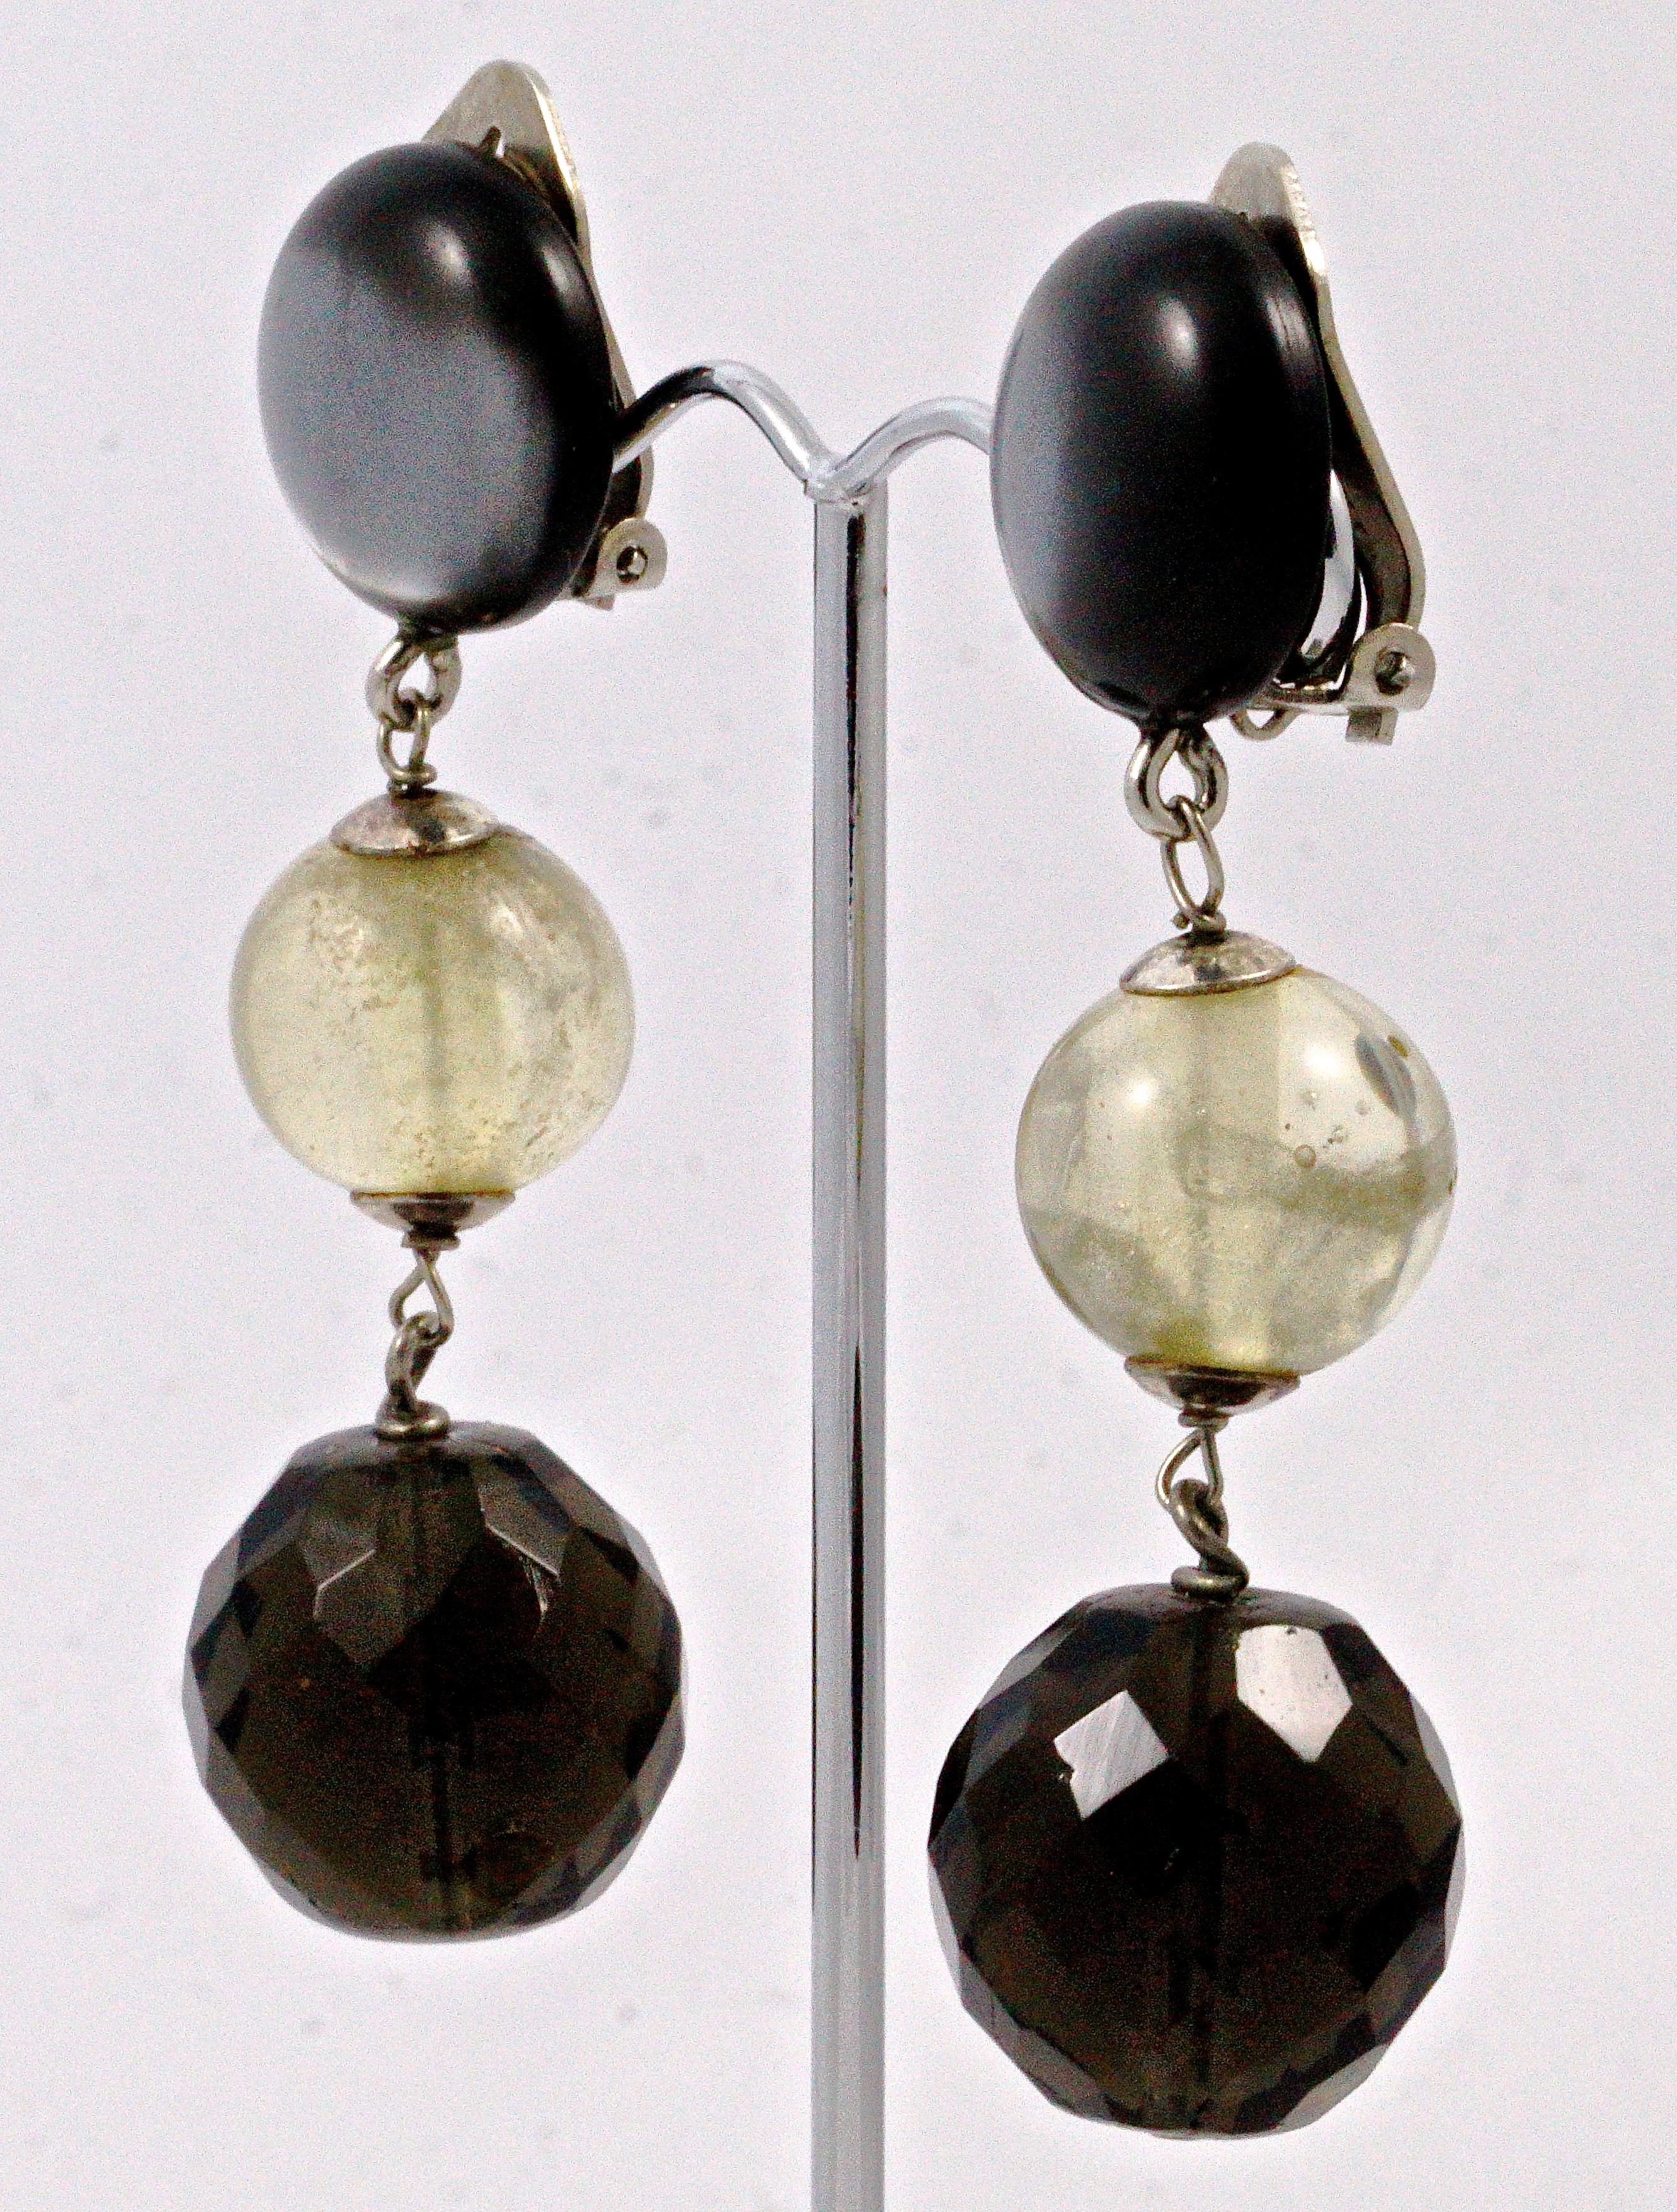 Lovely Giorgio Armani clip on drop earrings, featuring round green tinted balls and smoky green faceted glass stones hanging from contrasting grey moonglow tops. Measuring drop 6.5cm / 2.56 inches.

This is an unusual pair of vintage drop earrings